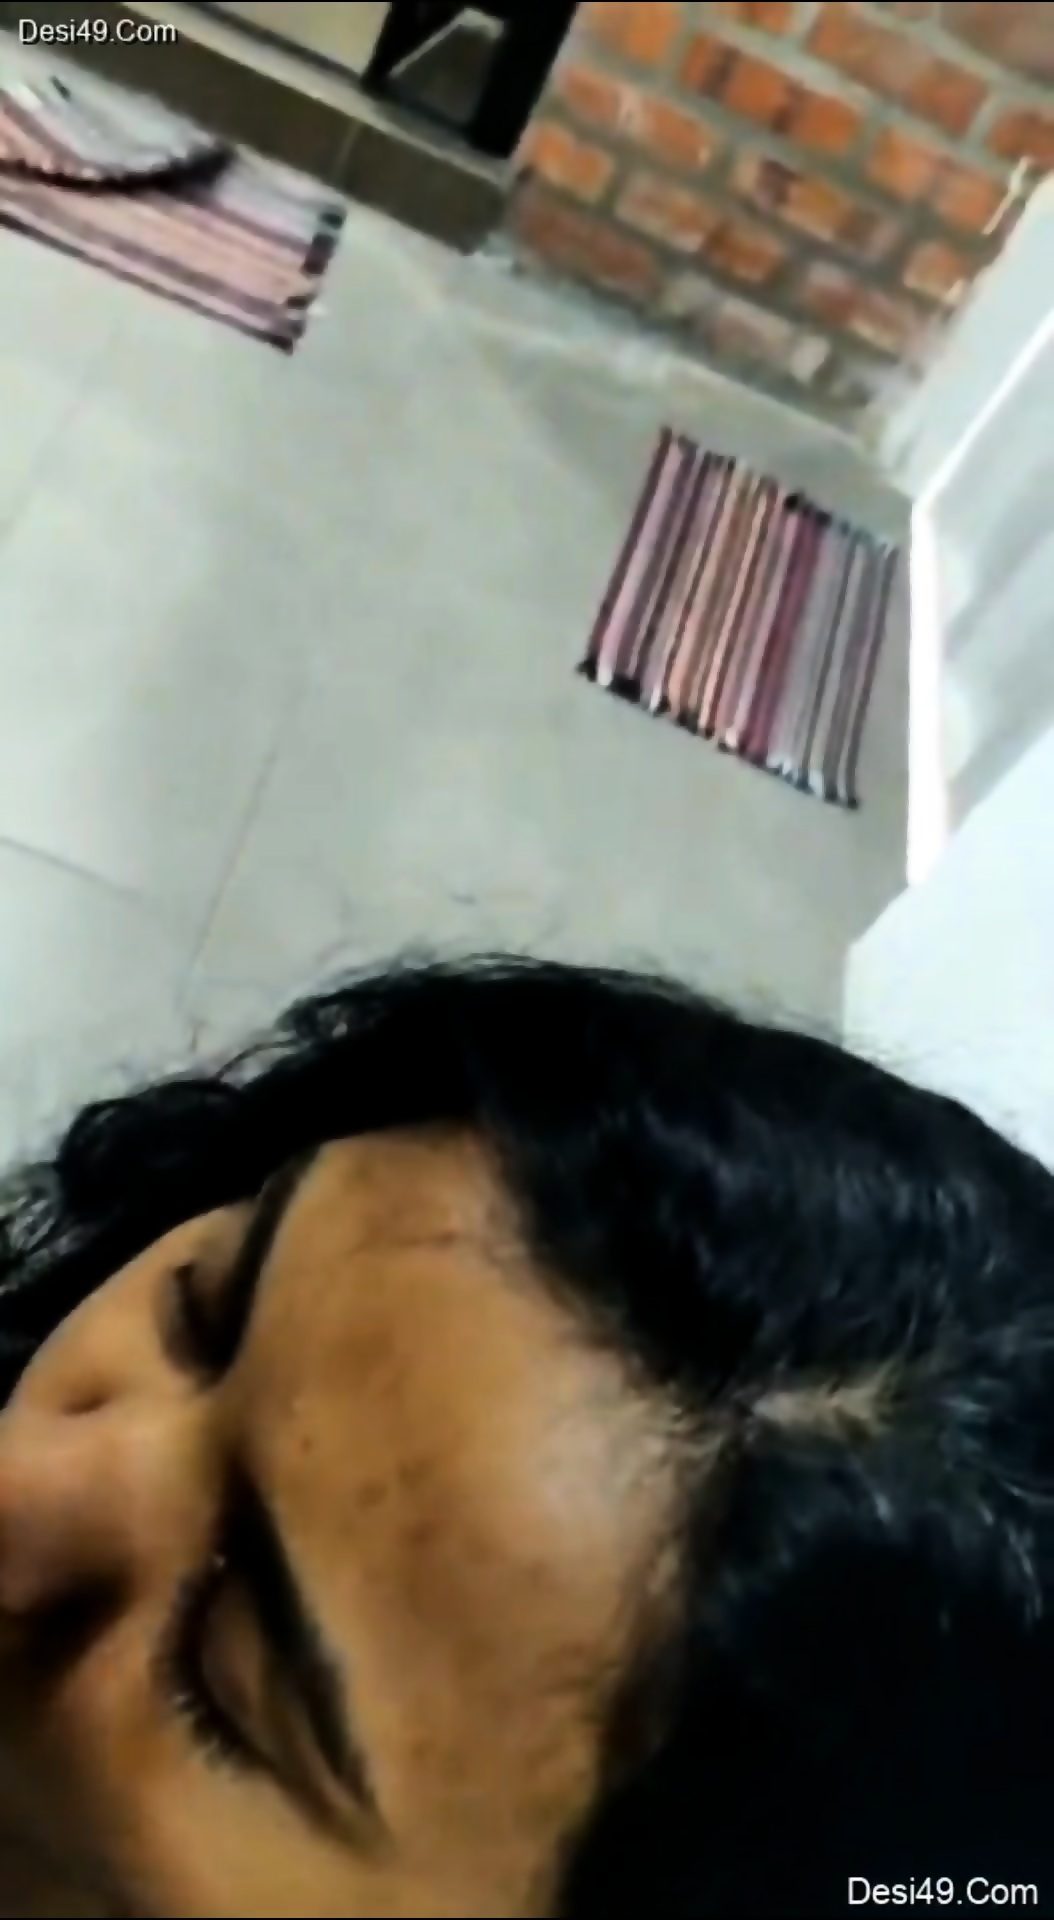 Tamil Wife Blowjob Hubby Full Video picture pic